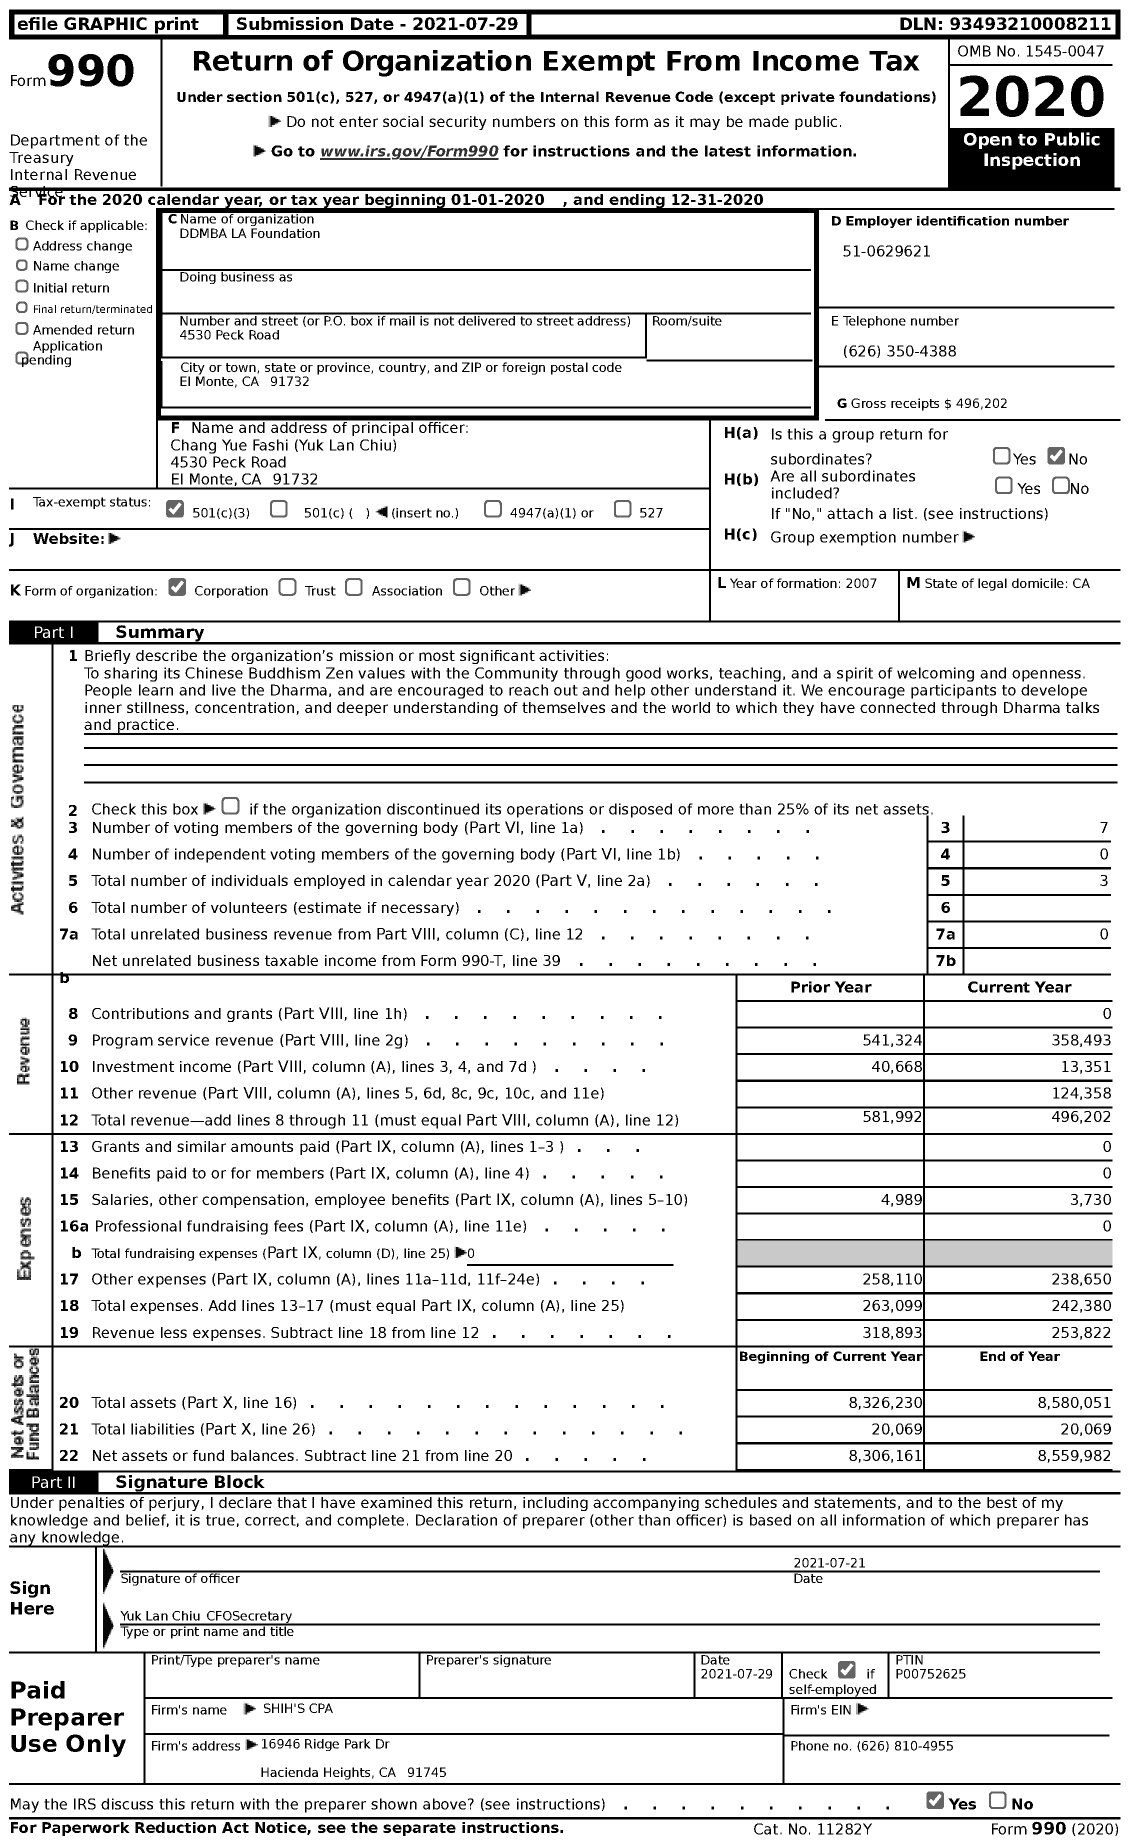 Image of first page of 2020 Form 990 for DDMBA LA Foundation